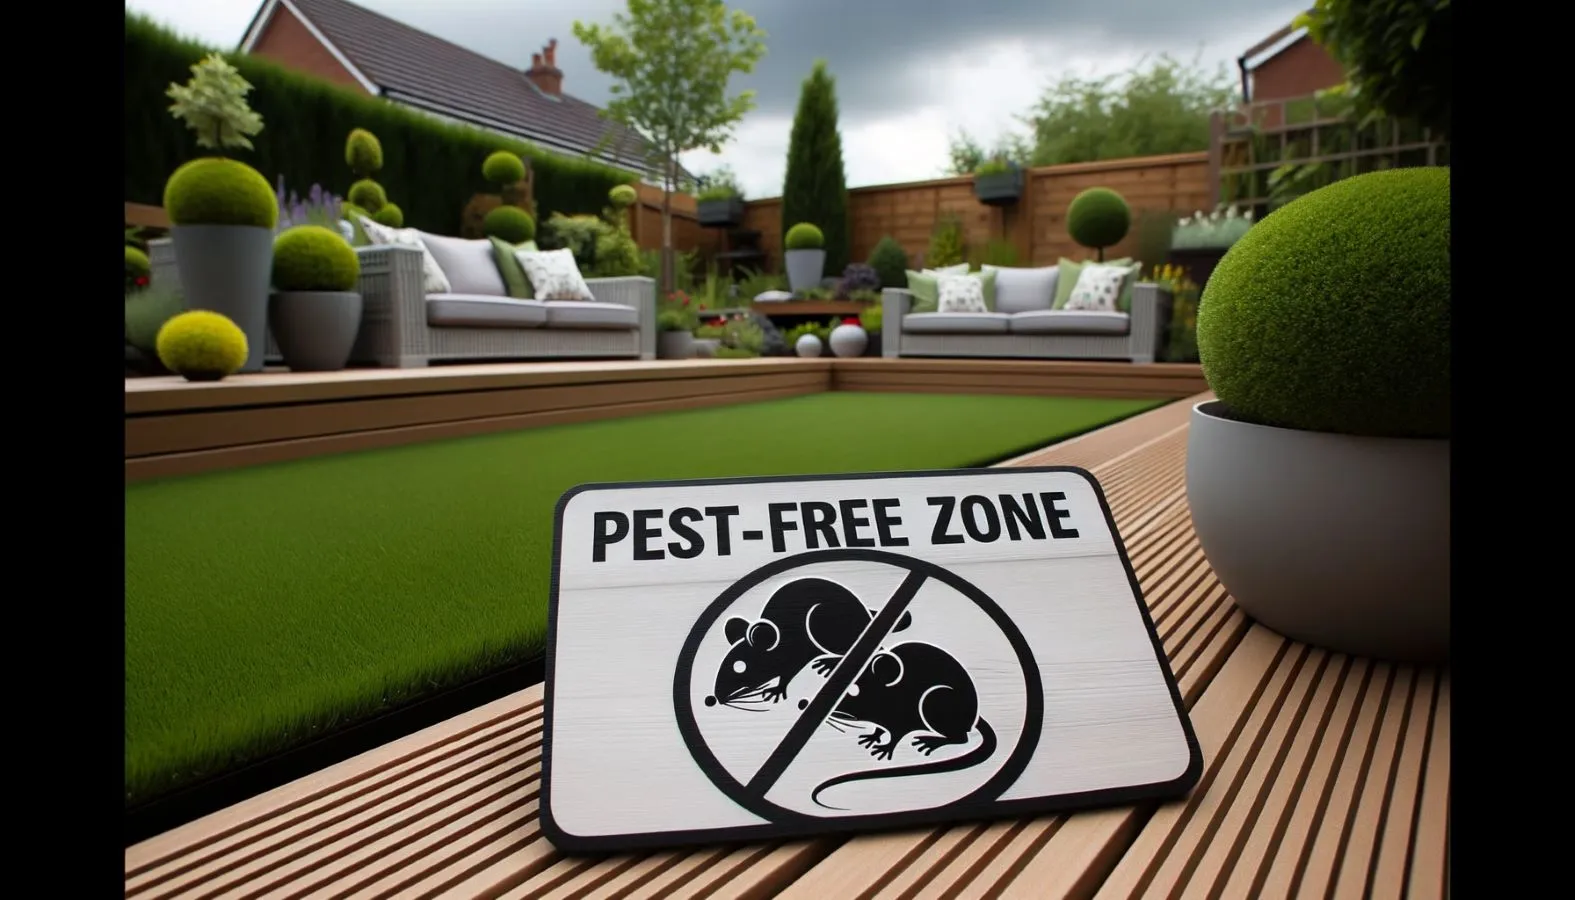 Landscaped garden with a 'Pest-Free Zone' sign on the decking, representing a garden free of pests.